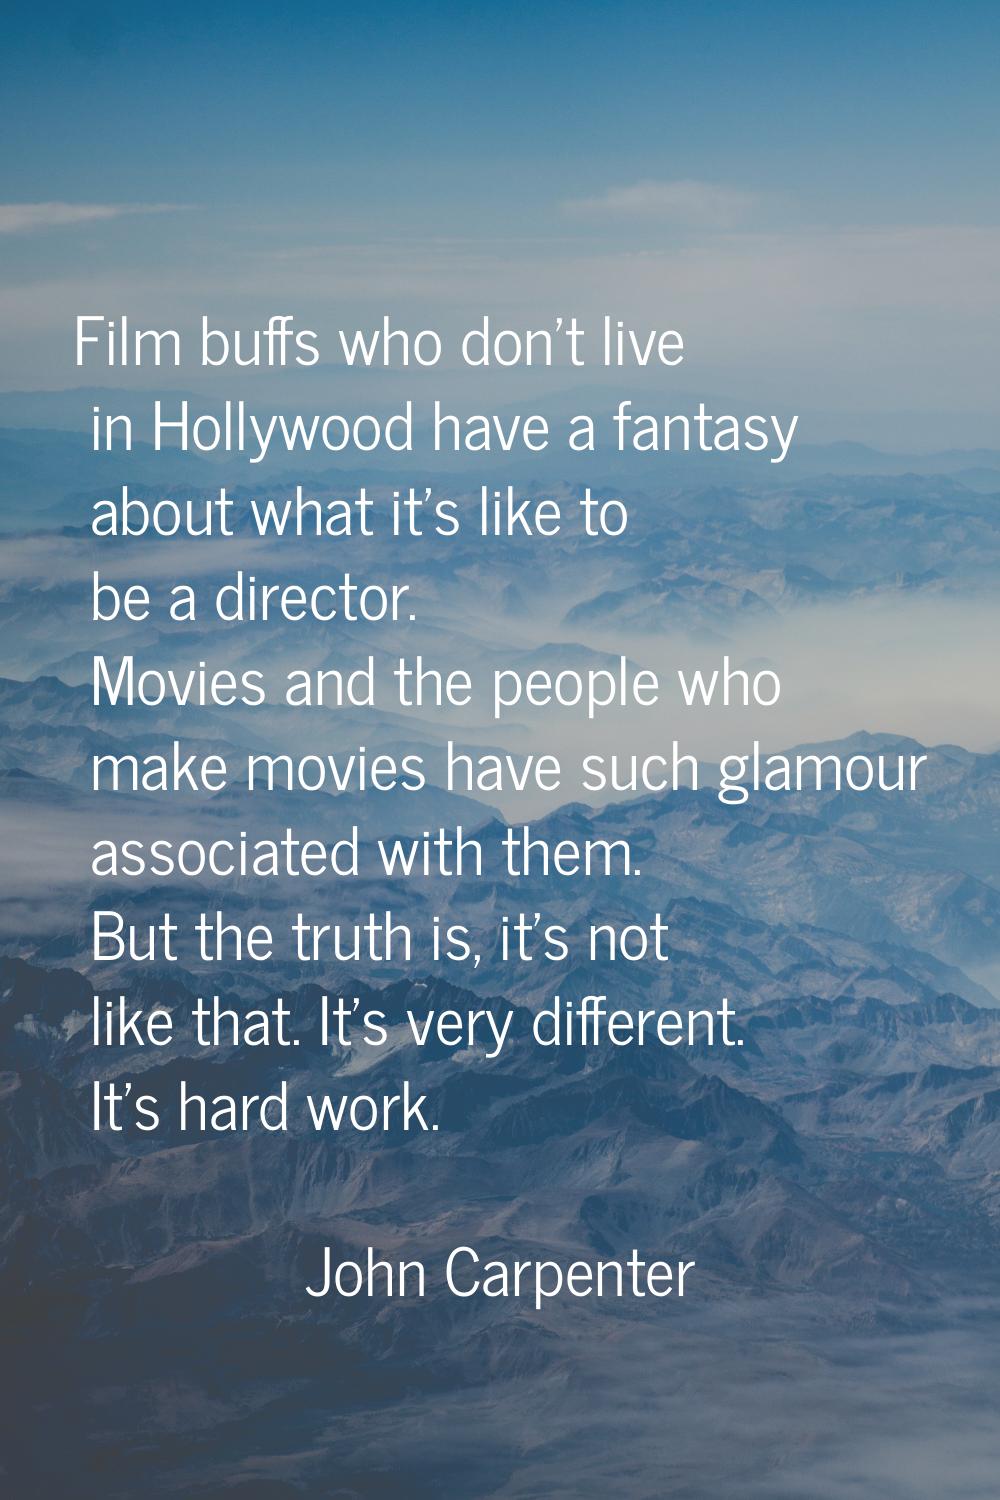 Film buffs who don't live in Hollywood have a fantasy about what it's like to be a director. Movies